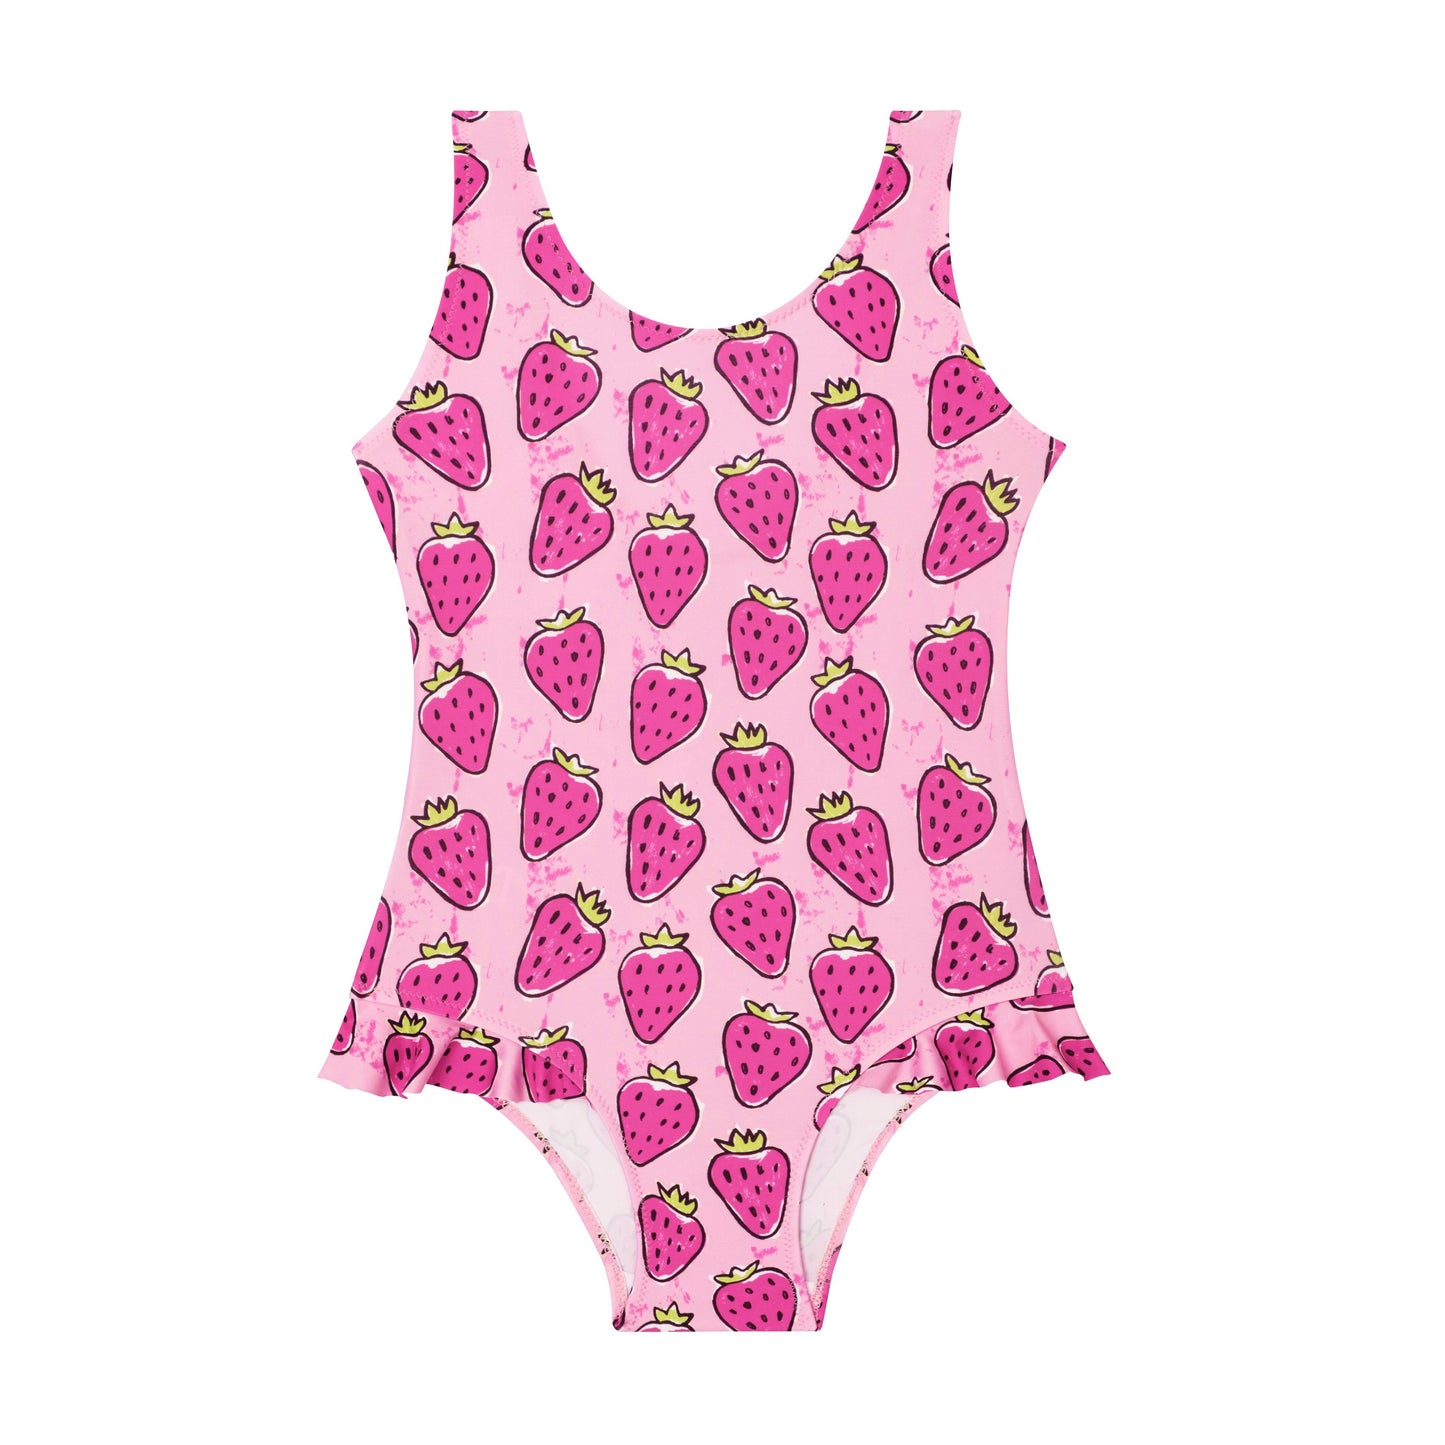 A swimsuit by Slipfree,style Strawberry, in pink. Front view.